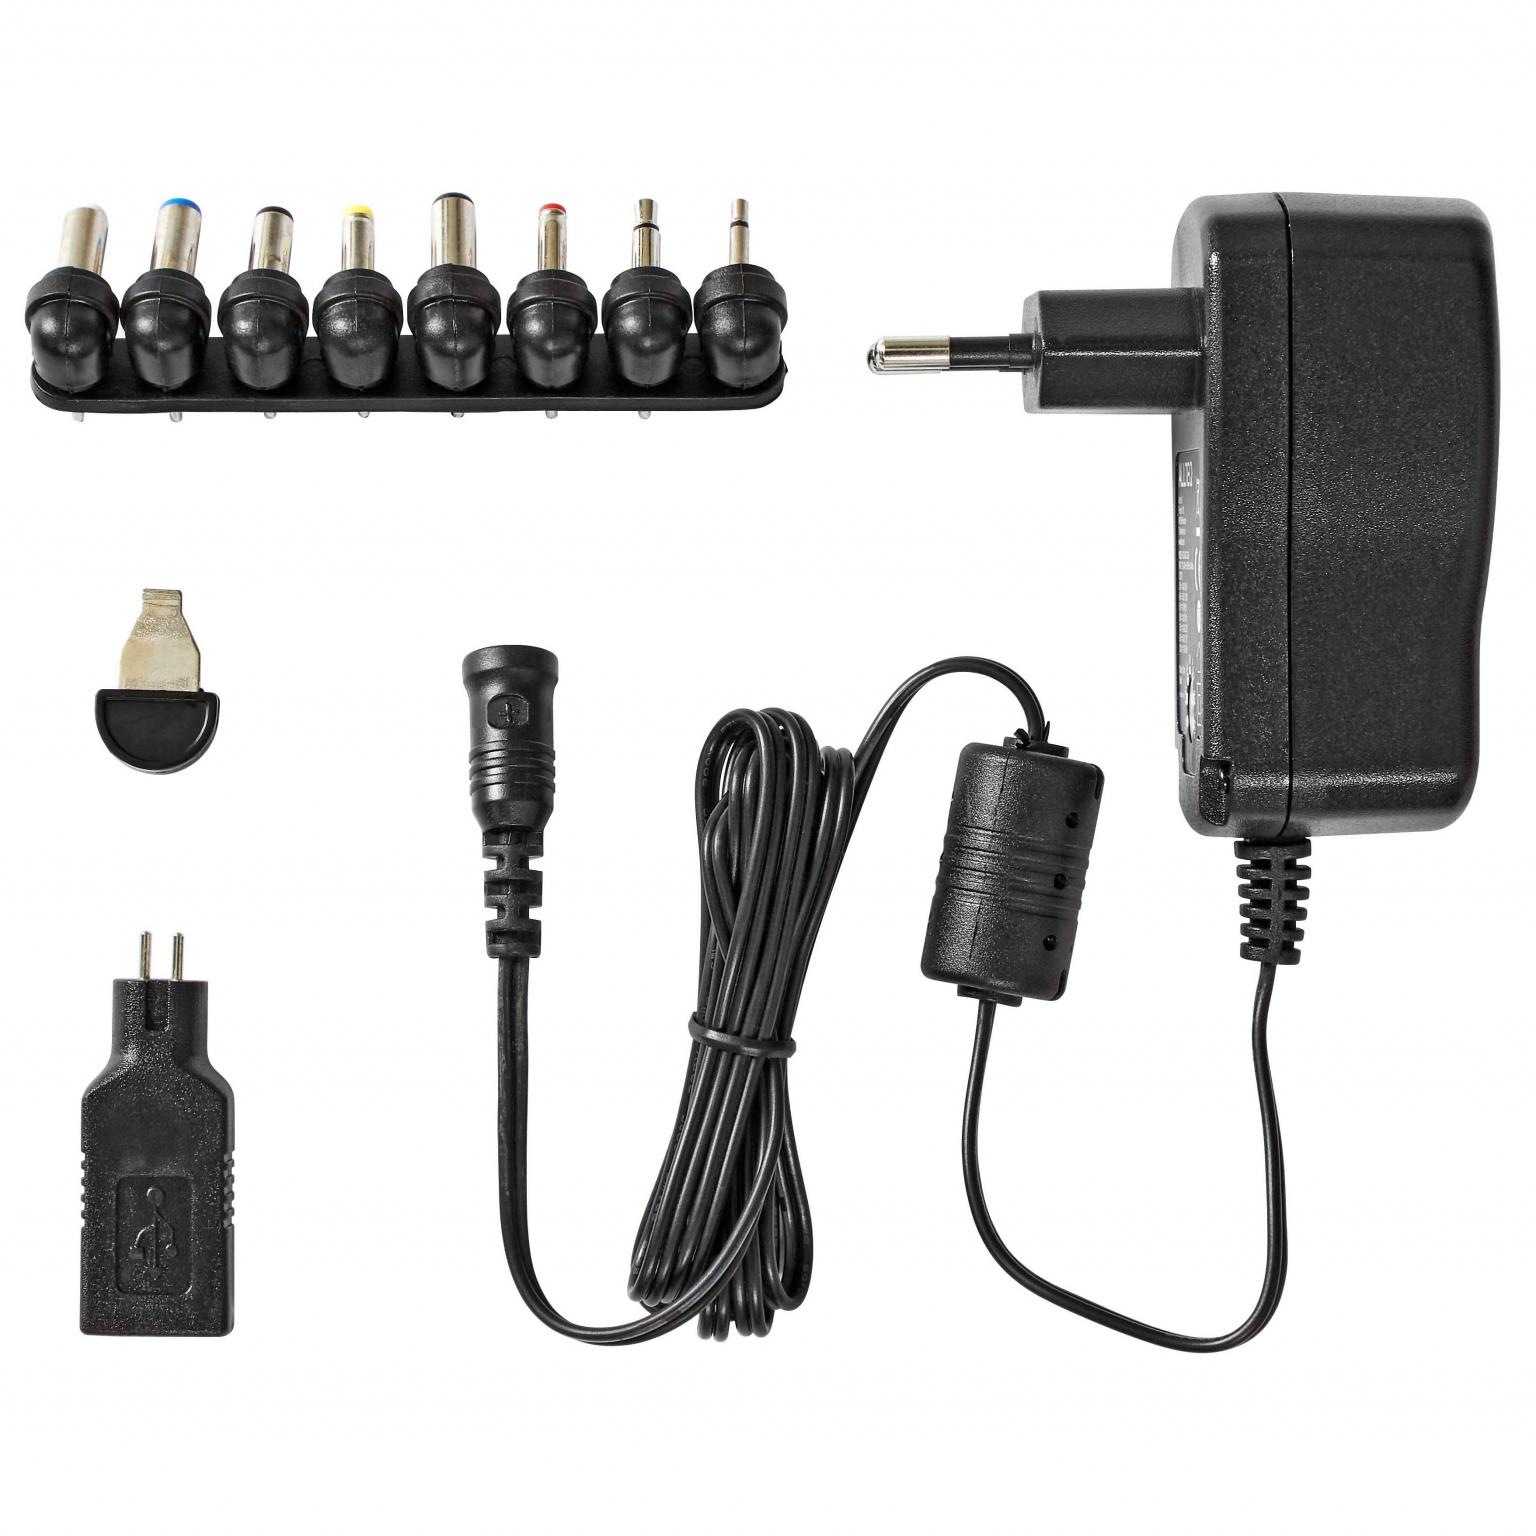 Universele AC - DC adapter - Allteq